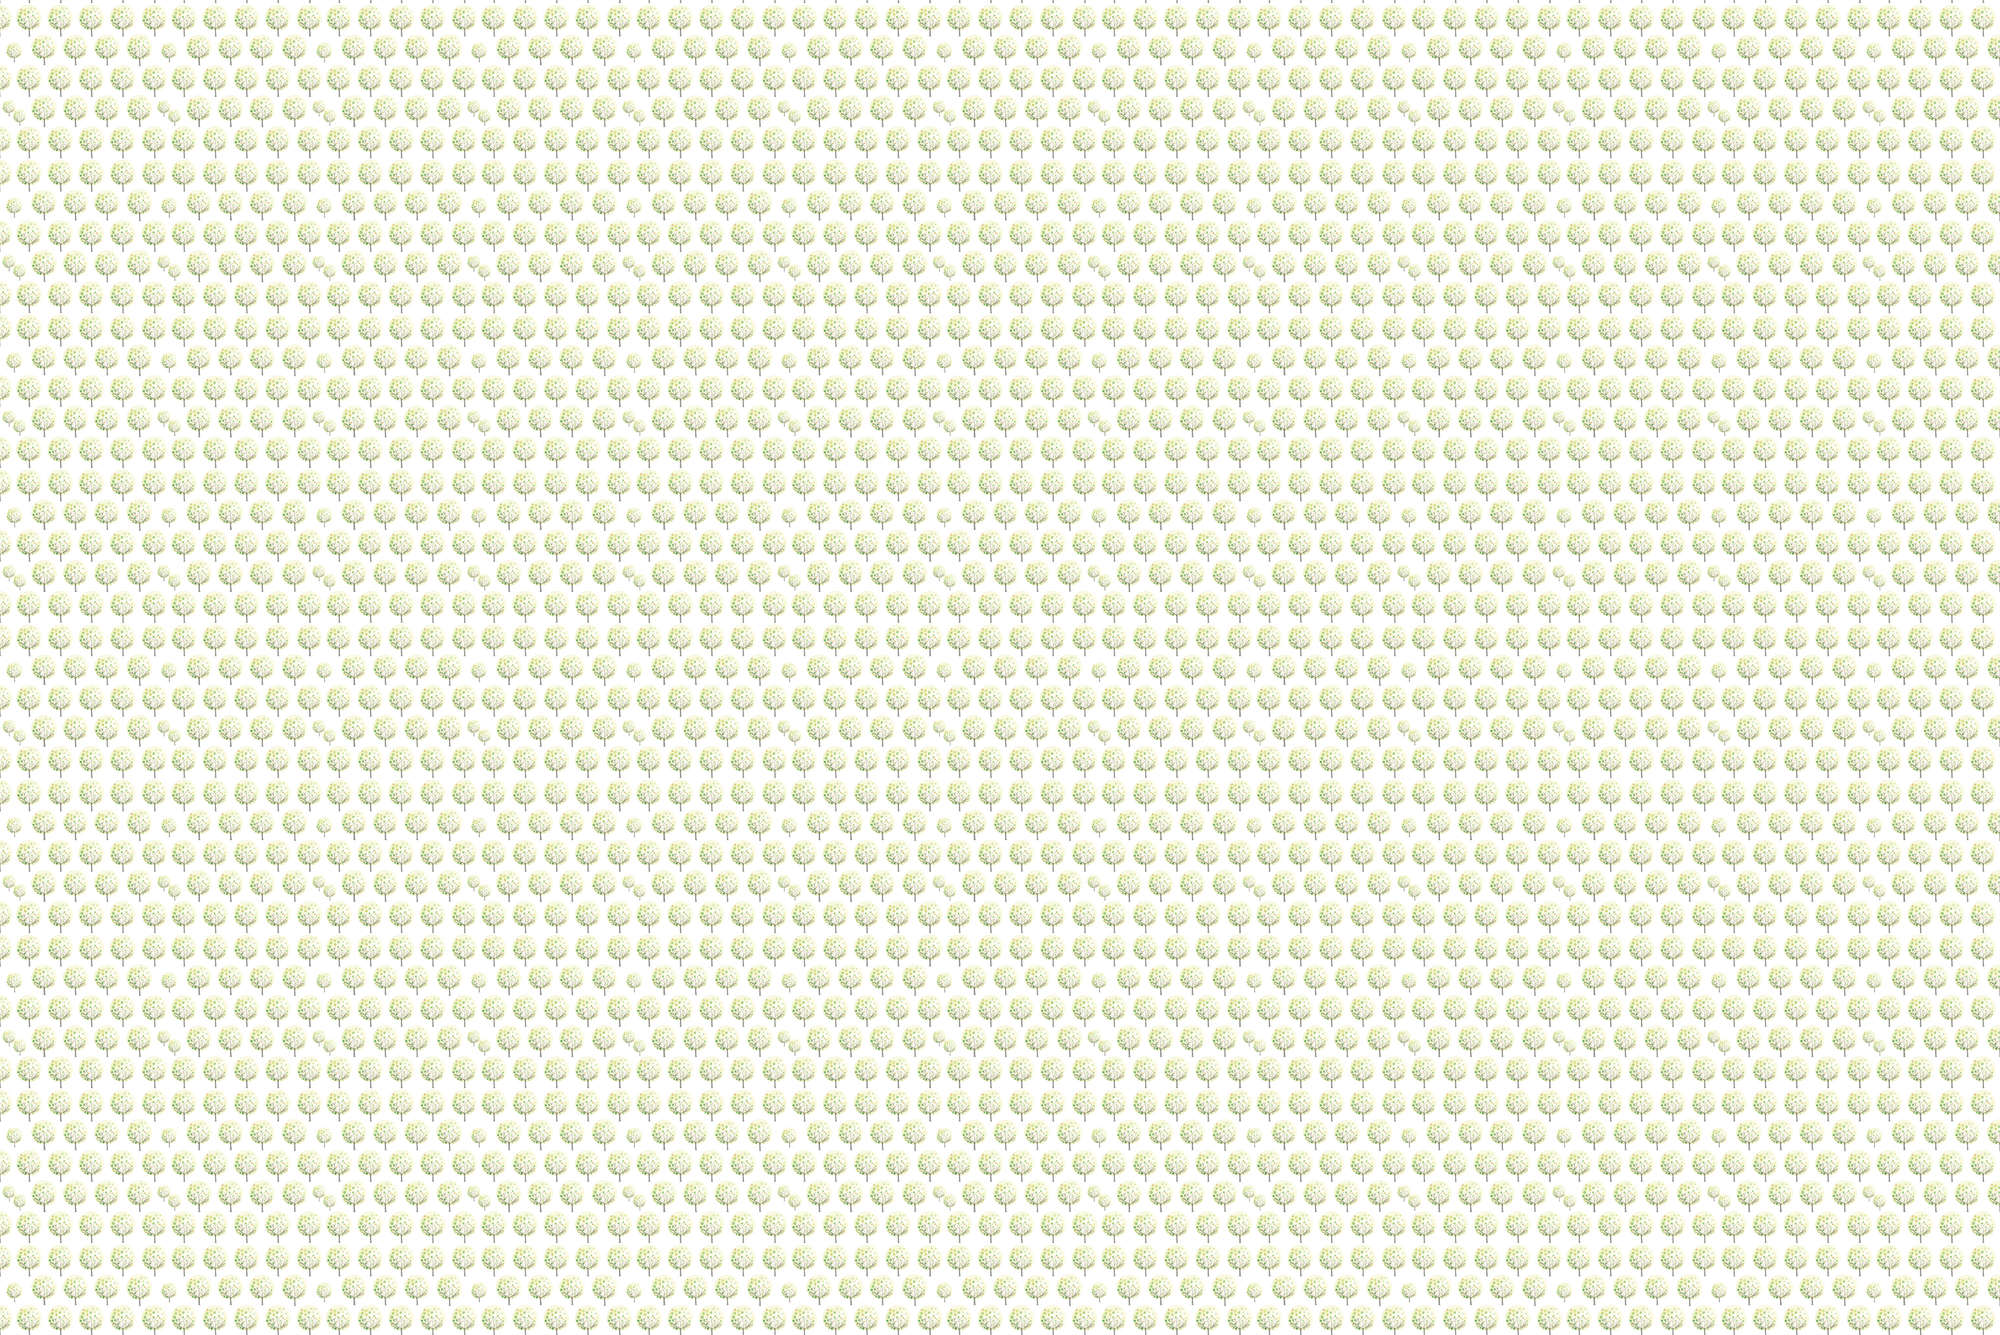             Design wall mural forest pattern in green on white background on textured non-woven
        